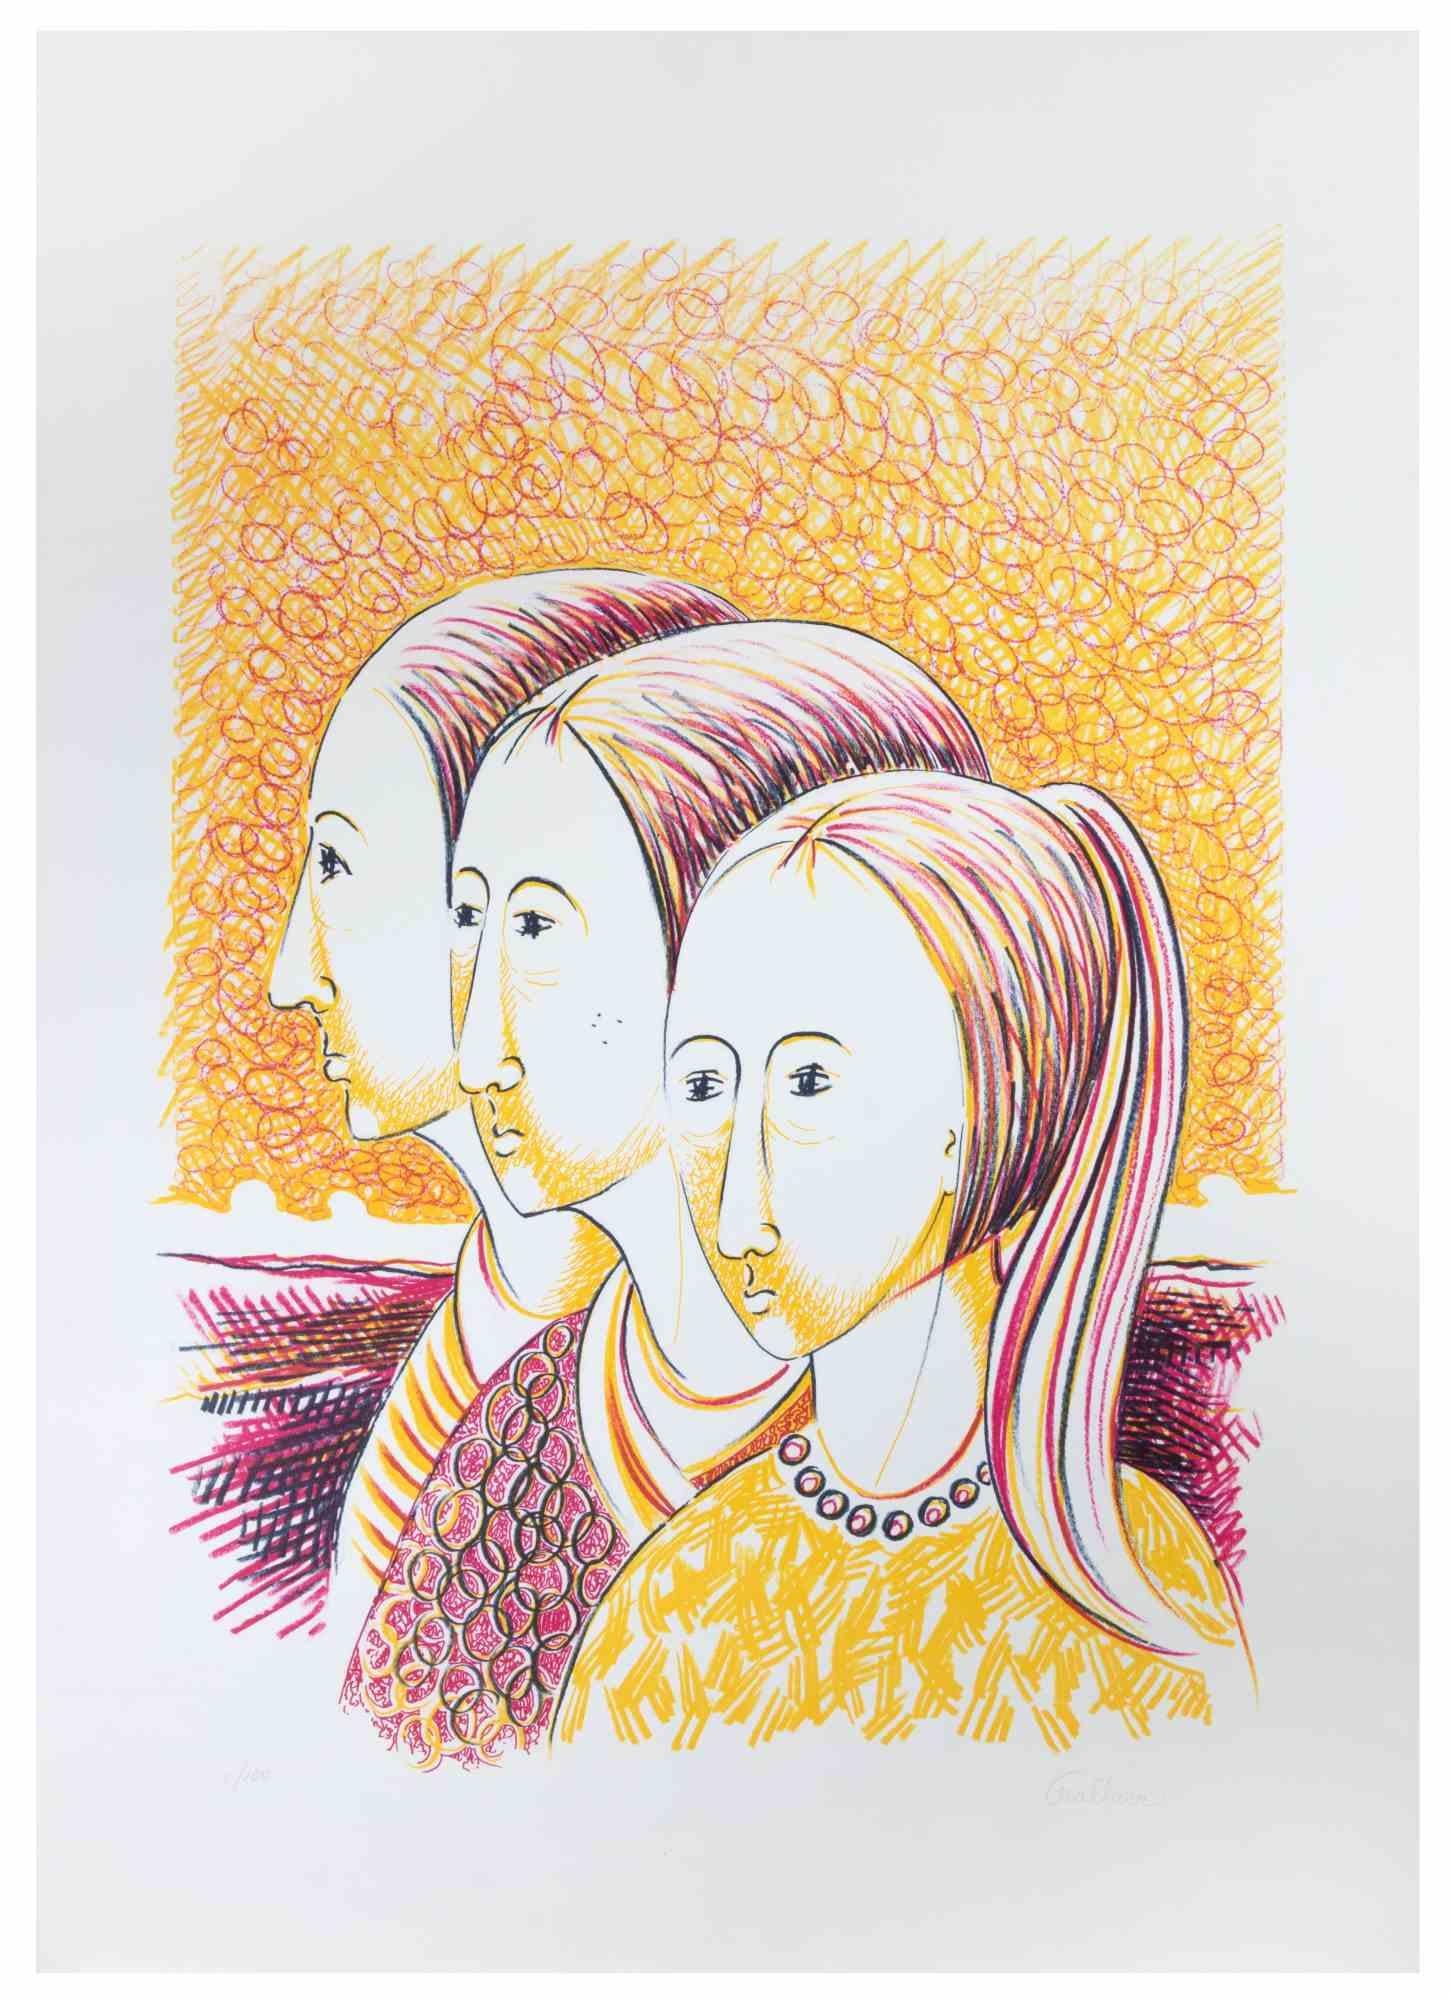 Three Girls is a lithograph on paper realized by Alberto Cavallari in the 1970s.

Hand-signed, and numbered, edition of 100 prints.

Good conditions.

The artwork realized through harmonious bright colors beautifully.